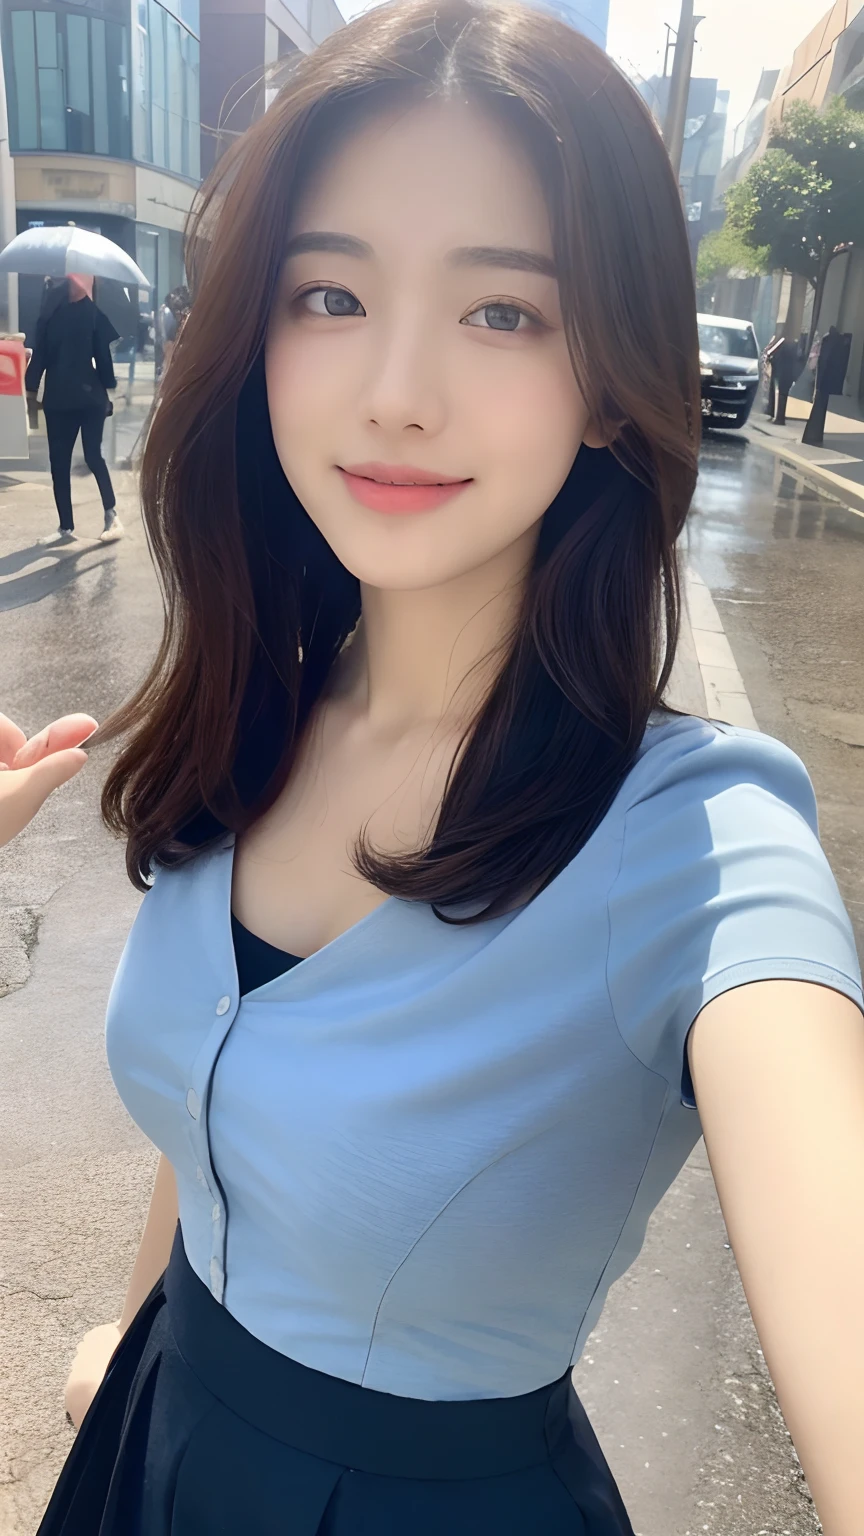 ((Best Quality, 8K, Masterpiece:1.3)), Focus: 1.2, Perfect Body Beauty: 1.4, Buttocks: 1.2, ((Hairstyle Random, Collarbone: 1.2)), (Short Skirt: 1.1) , (Rain, Street:1.3), Highly detailed face and skin texture, Fine eyes, Double eyelids, Whitened skin, Long hair, smile, Long legs: 1.5, Full body: 1.5, Best proportions of four fingers and one thumb, Smiley face, Face texture: 1.3, Sunshine, Summer, collarbone, beautiful eyes, real face, real skin, realistic face, realistic skin, detailed eyes, detailed facial features, detailed clothing features, detailed face, tight fit, tight fit, girl dress random, background office: 1.5, upper body shirt